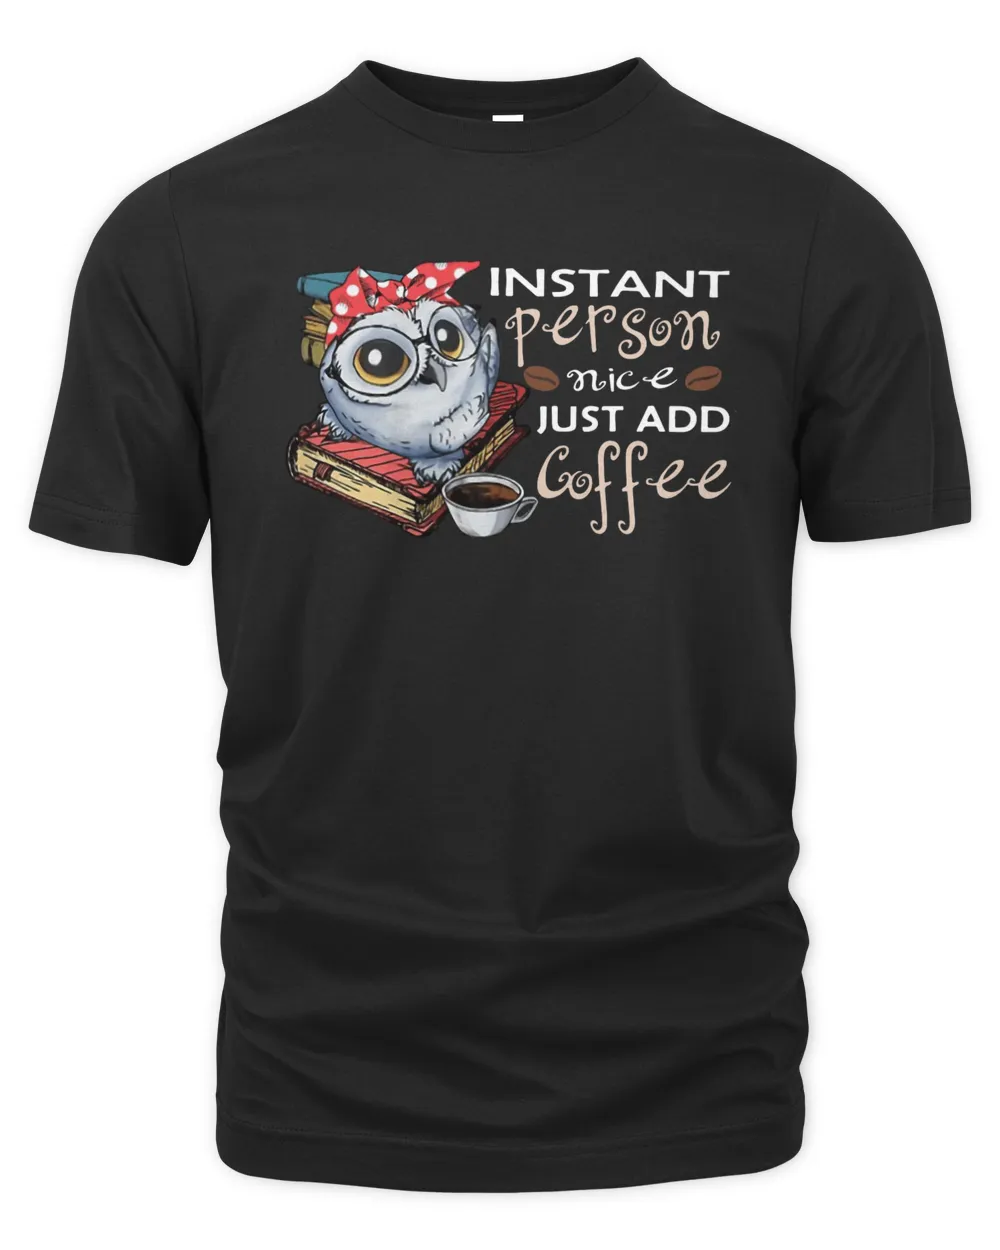 Owl Instant Person Nice Just Add Coffee Shirt